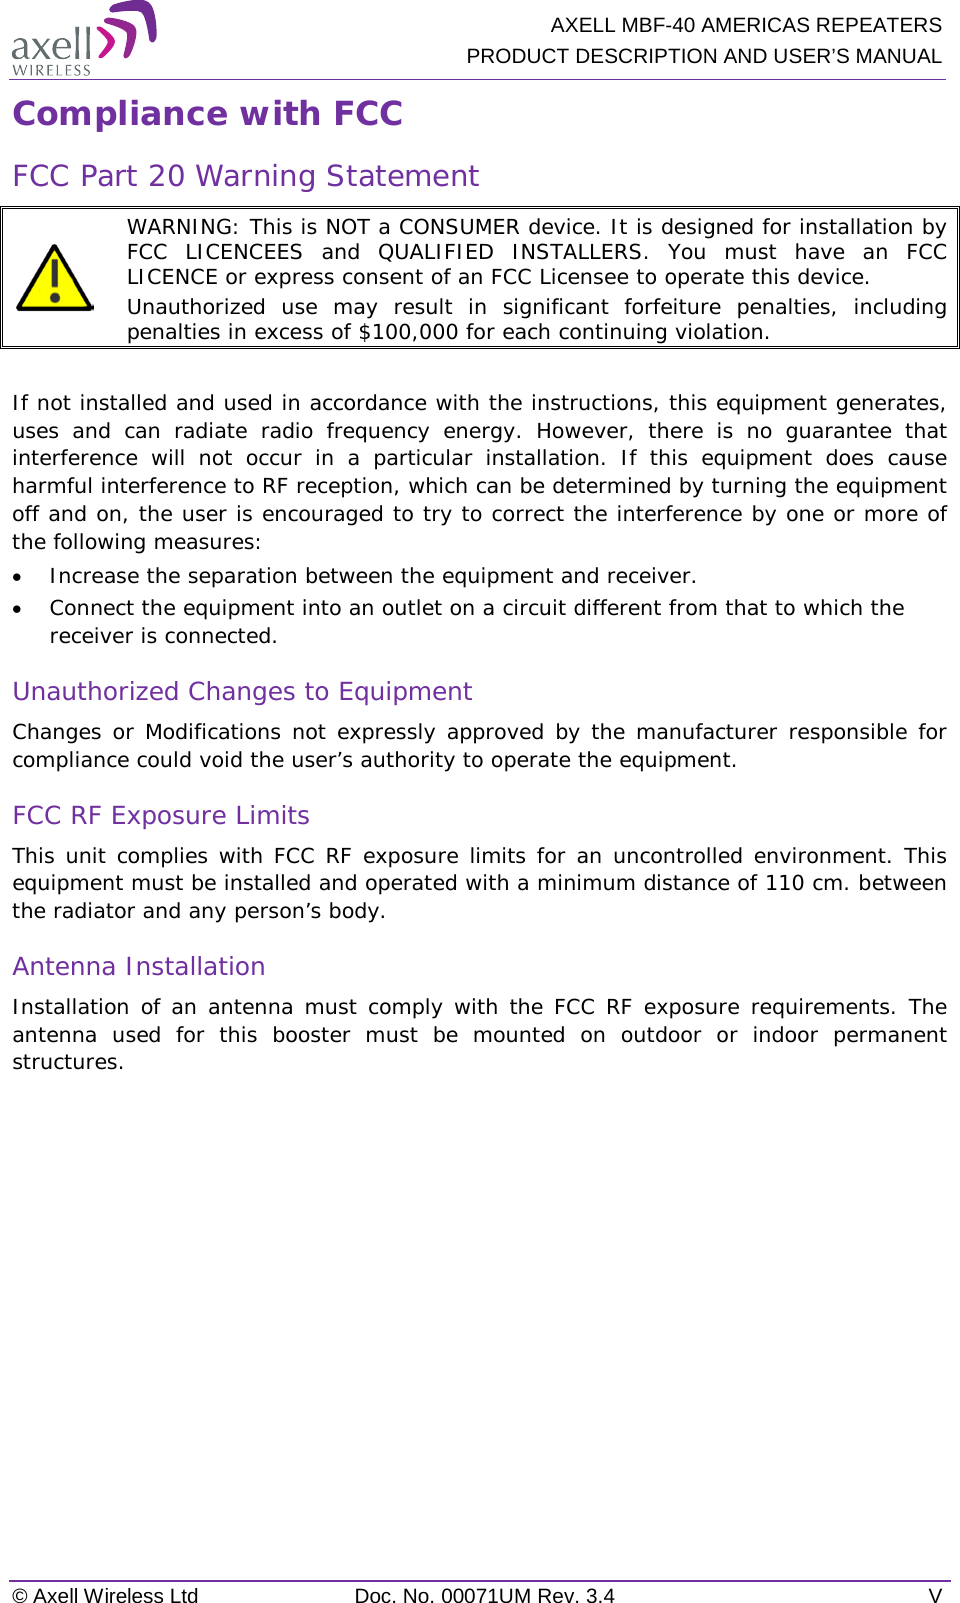  AXELL MBF-40 AMERICAS REPEATERS PRODUCT DESCRIPTION AND USER’S MANUAL © Axell Wireless Ltd Doc. No. 00071UM Rev. 3.4  V Compliance with FCC FCC Part 20 Warning Statement   WARNING: This is NOT a CONSUMER device. It is designed for installation by FCC LICENCEES and QUALIFIED INSTALLERS. You must have an FCC LICENCE or express consent of an FCC Licensee to operate this device.  Unauthorized use may result in significant forfeiture penalties, including penalties in excess of $100,000 for each continuing violation.  If not installed and used in accordance with the instructions, this equipment generates, uses and can radiate radio frequency energy. However, there is no guarantee that interference will not occur in a particular installation. If this equipment does cause harmful interference to RF reception, which can be determined by turning the equipment off and on, the user is encouraged to try to correct the interference by one or more of the following measures: • Increase the separation between the equipment and receiver. • Connect the equipment into an outlet on a circuit different from that to which the receiver is connected. Unauthorized Changes to Equipment Changes or Modifications not expressly approved by the manufacturer responsible for compliance could void the user’s authority to operate the equipment. FCC RF Exposure Limits This unit complies with FCC RF exposure limits for an uncontrolled environment. This equipment must be installed and operated with a minimum distance of 110 cm. between the radiator and any person’s body.   Antenna Installation Installation of an antenna must comply with the FCC RF exposure requirements. The antenna used for this booster must be mounted on outdoor or indoor permanent structures.        